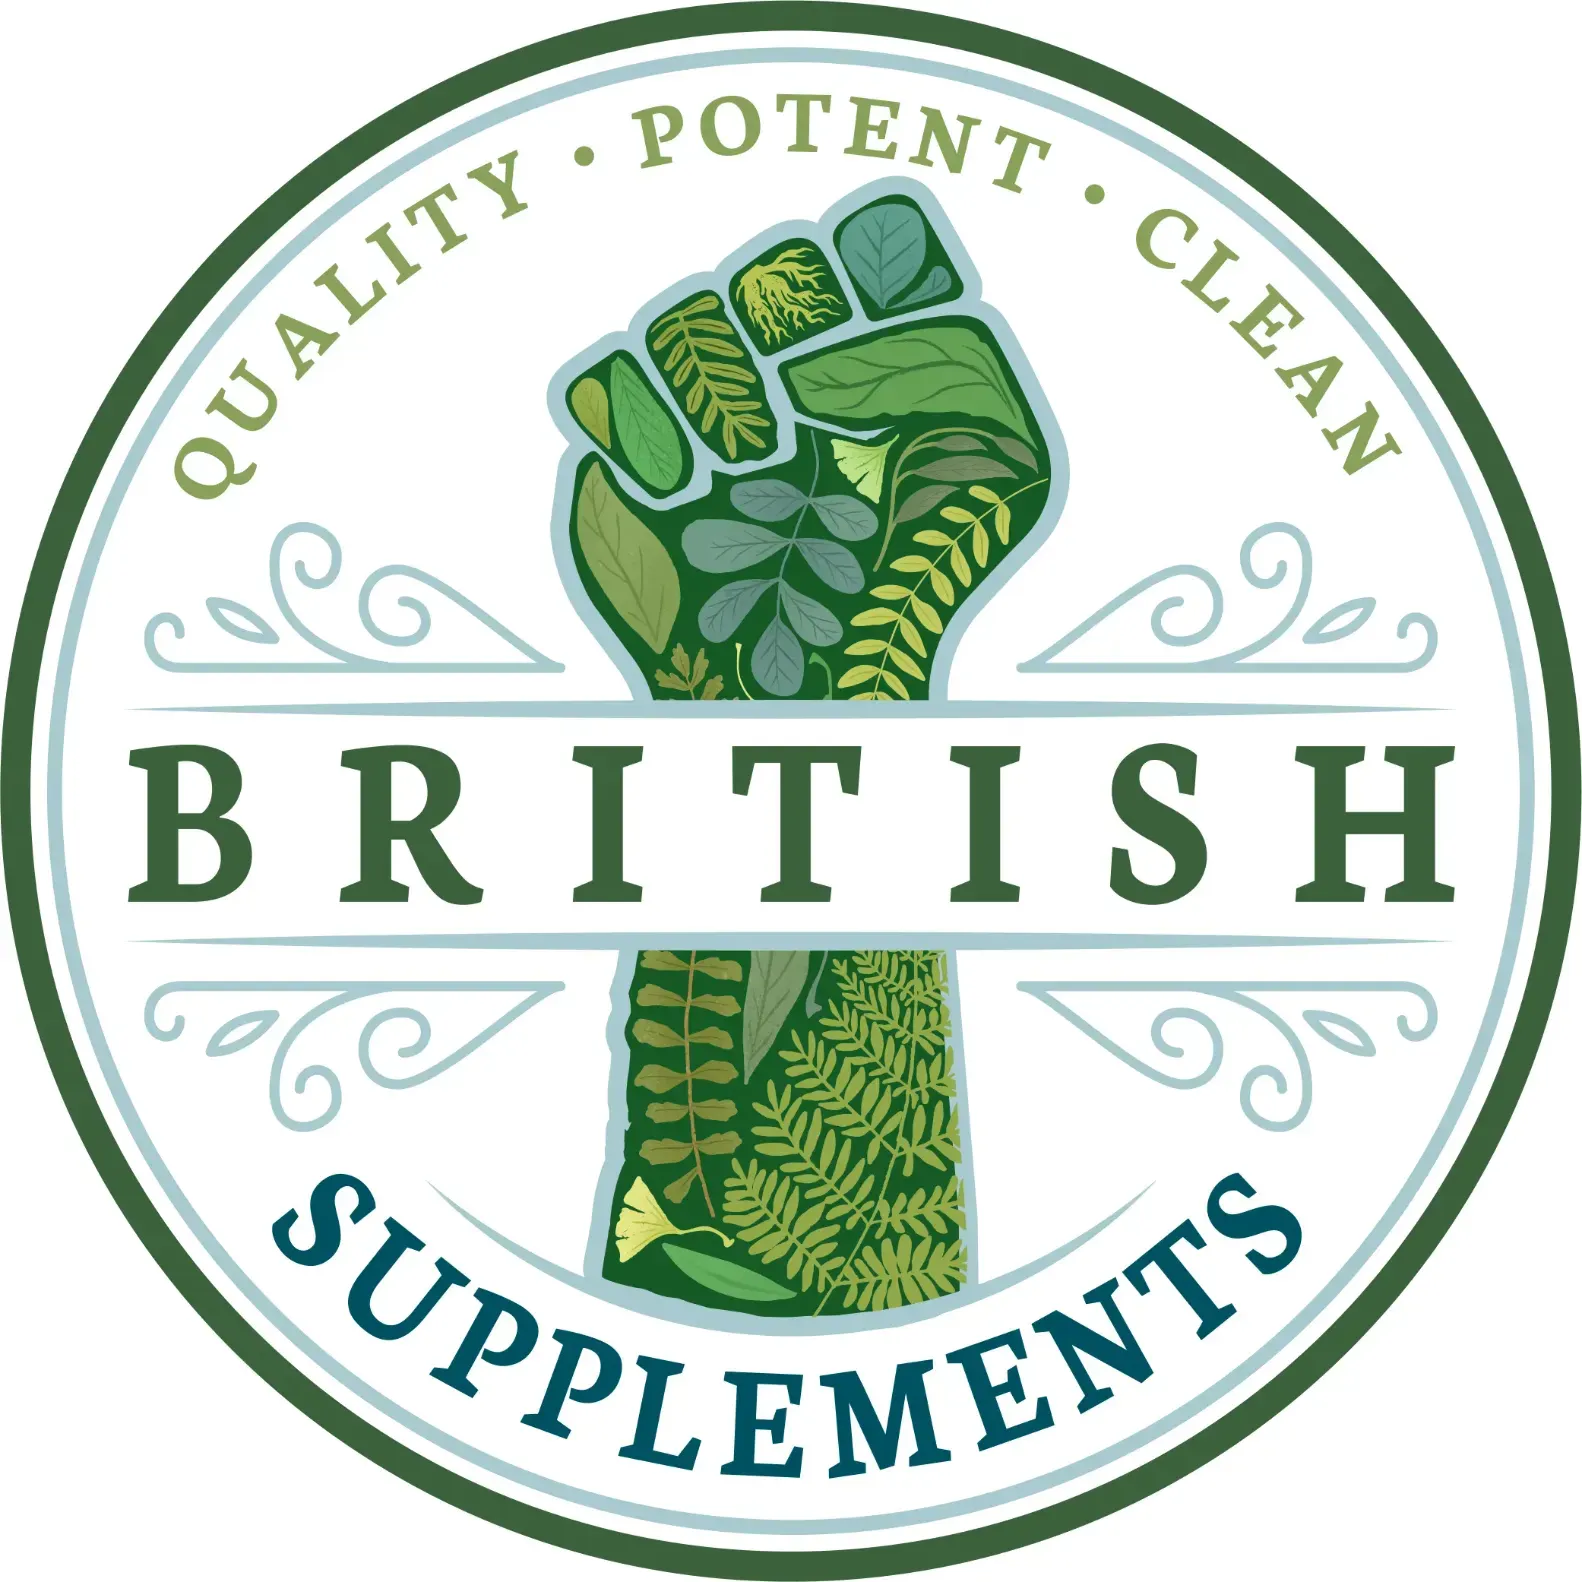 British Supplements Coupons & Promo Codes